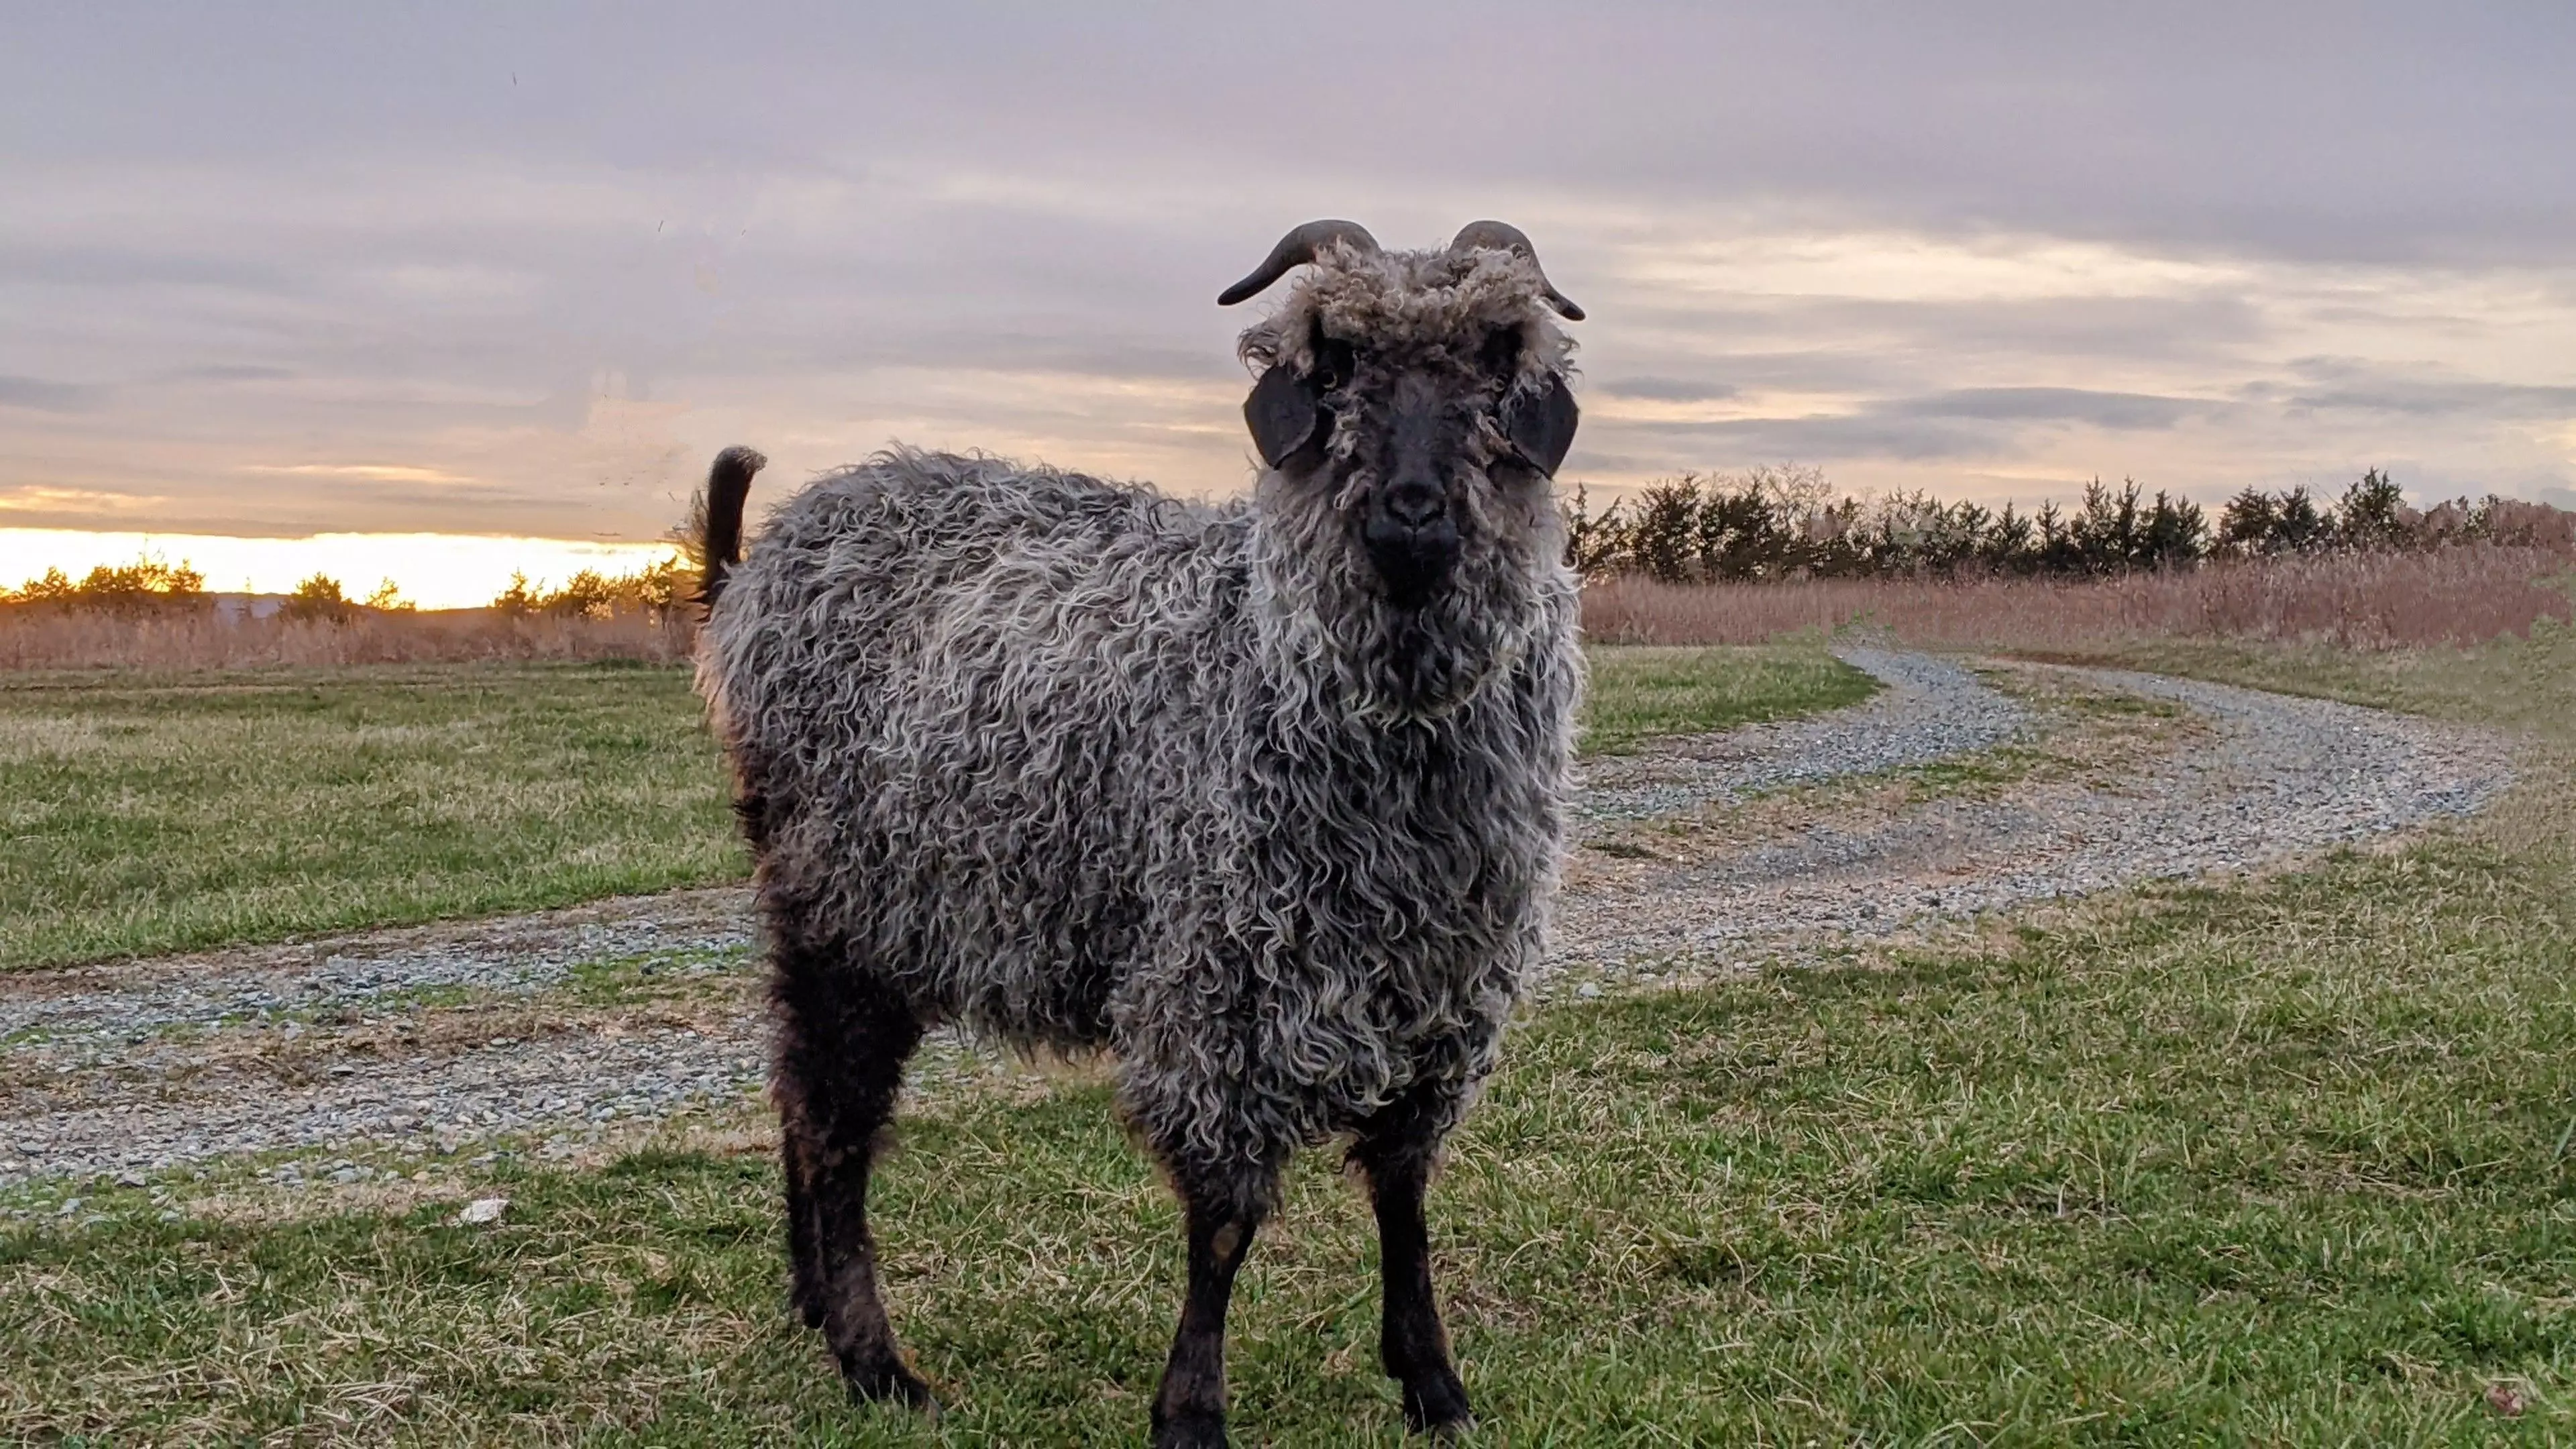 An image of a goat named Buckwheat